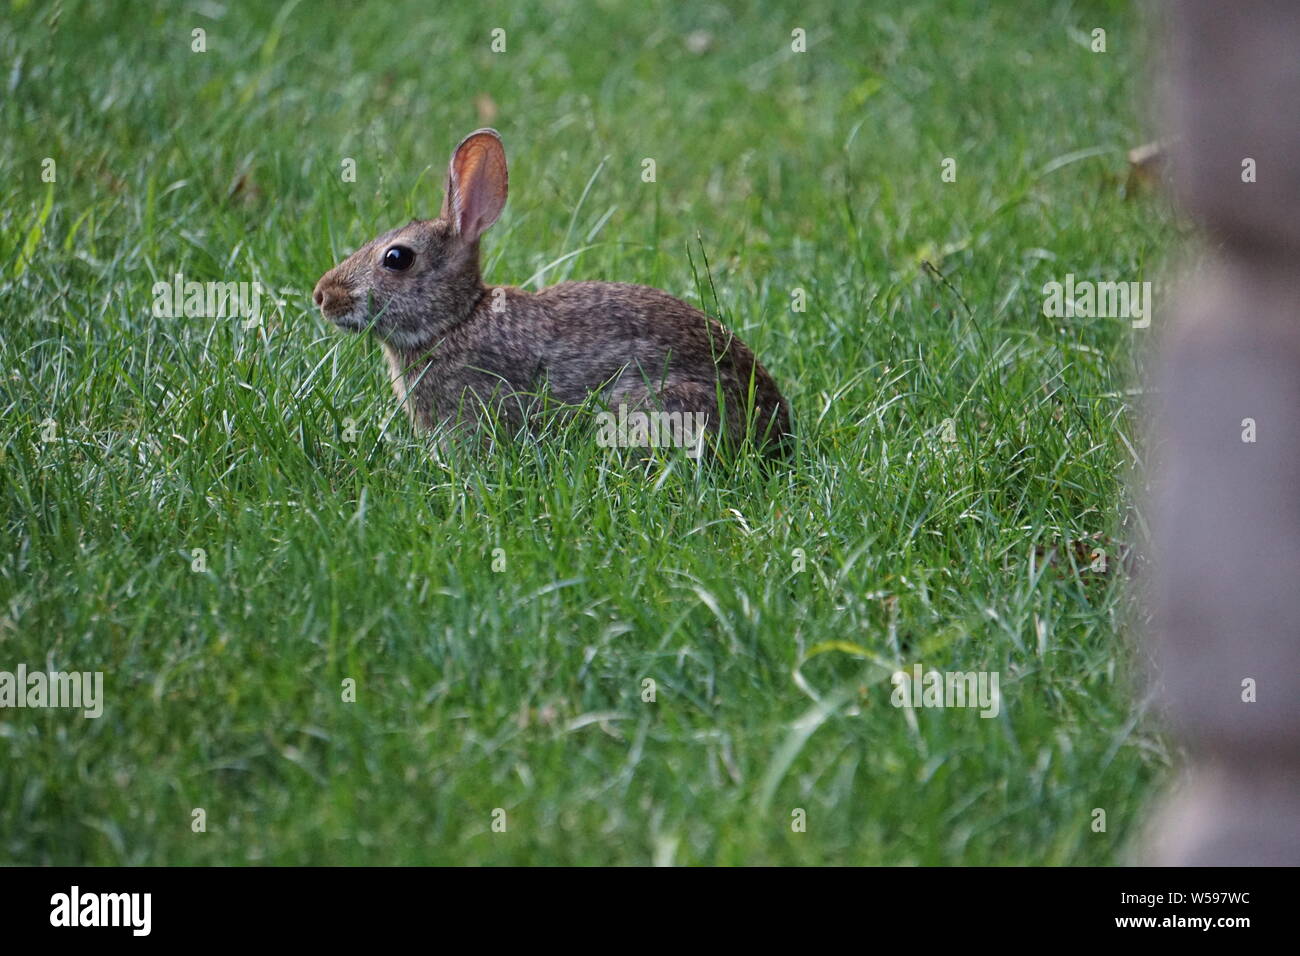 Brown rabbit sits quietly in the backyard grass Stock Photo